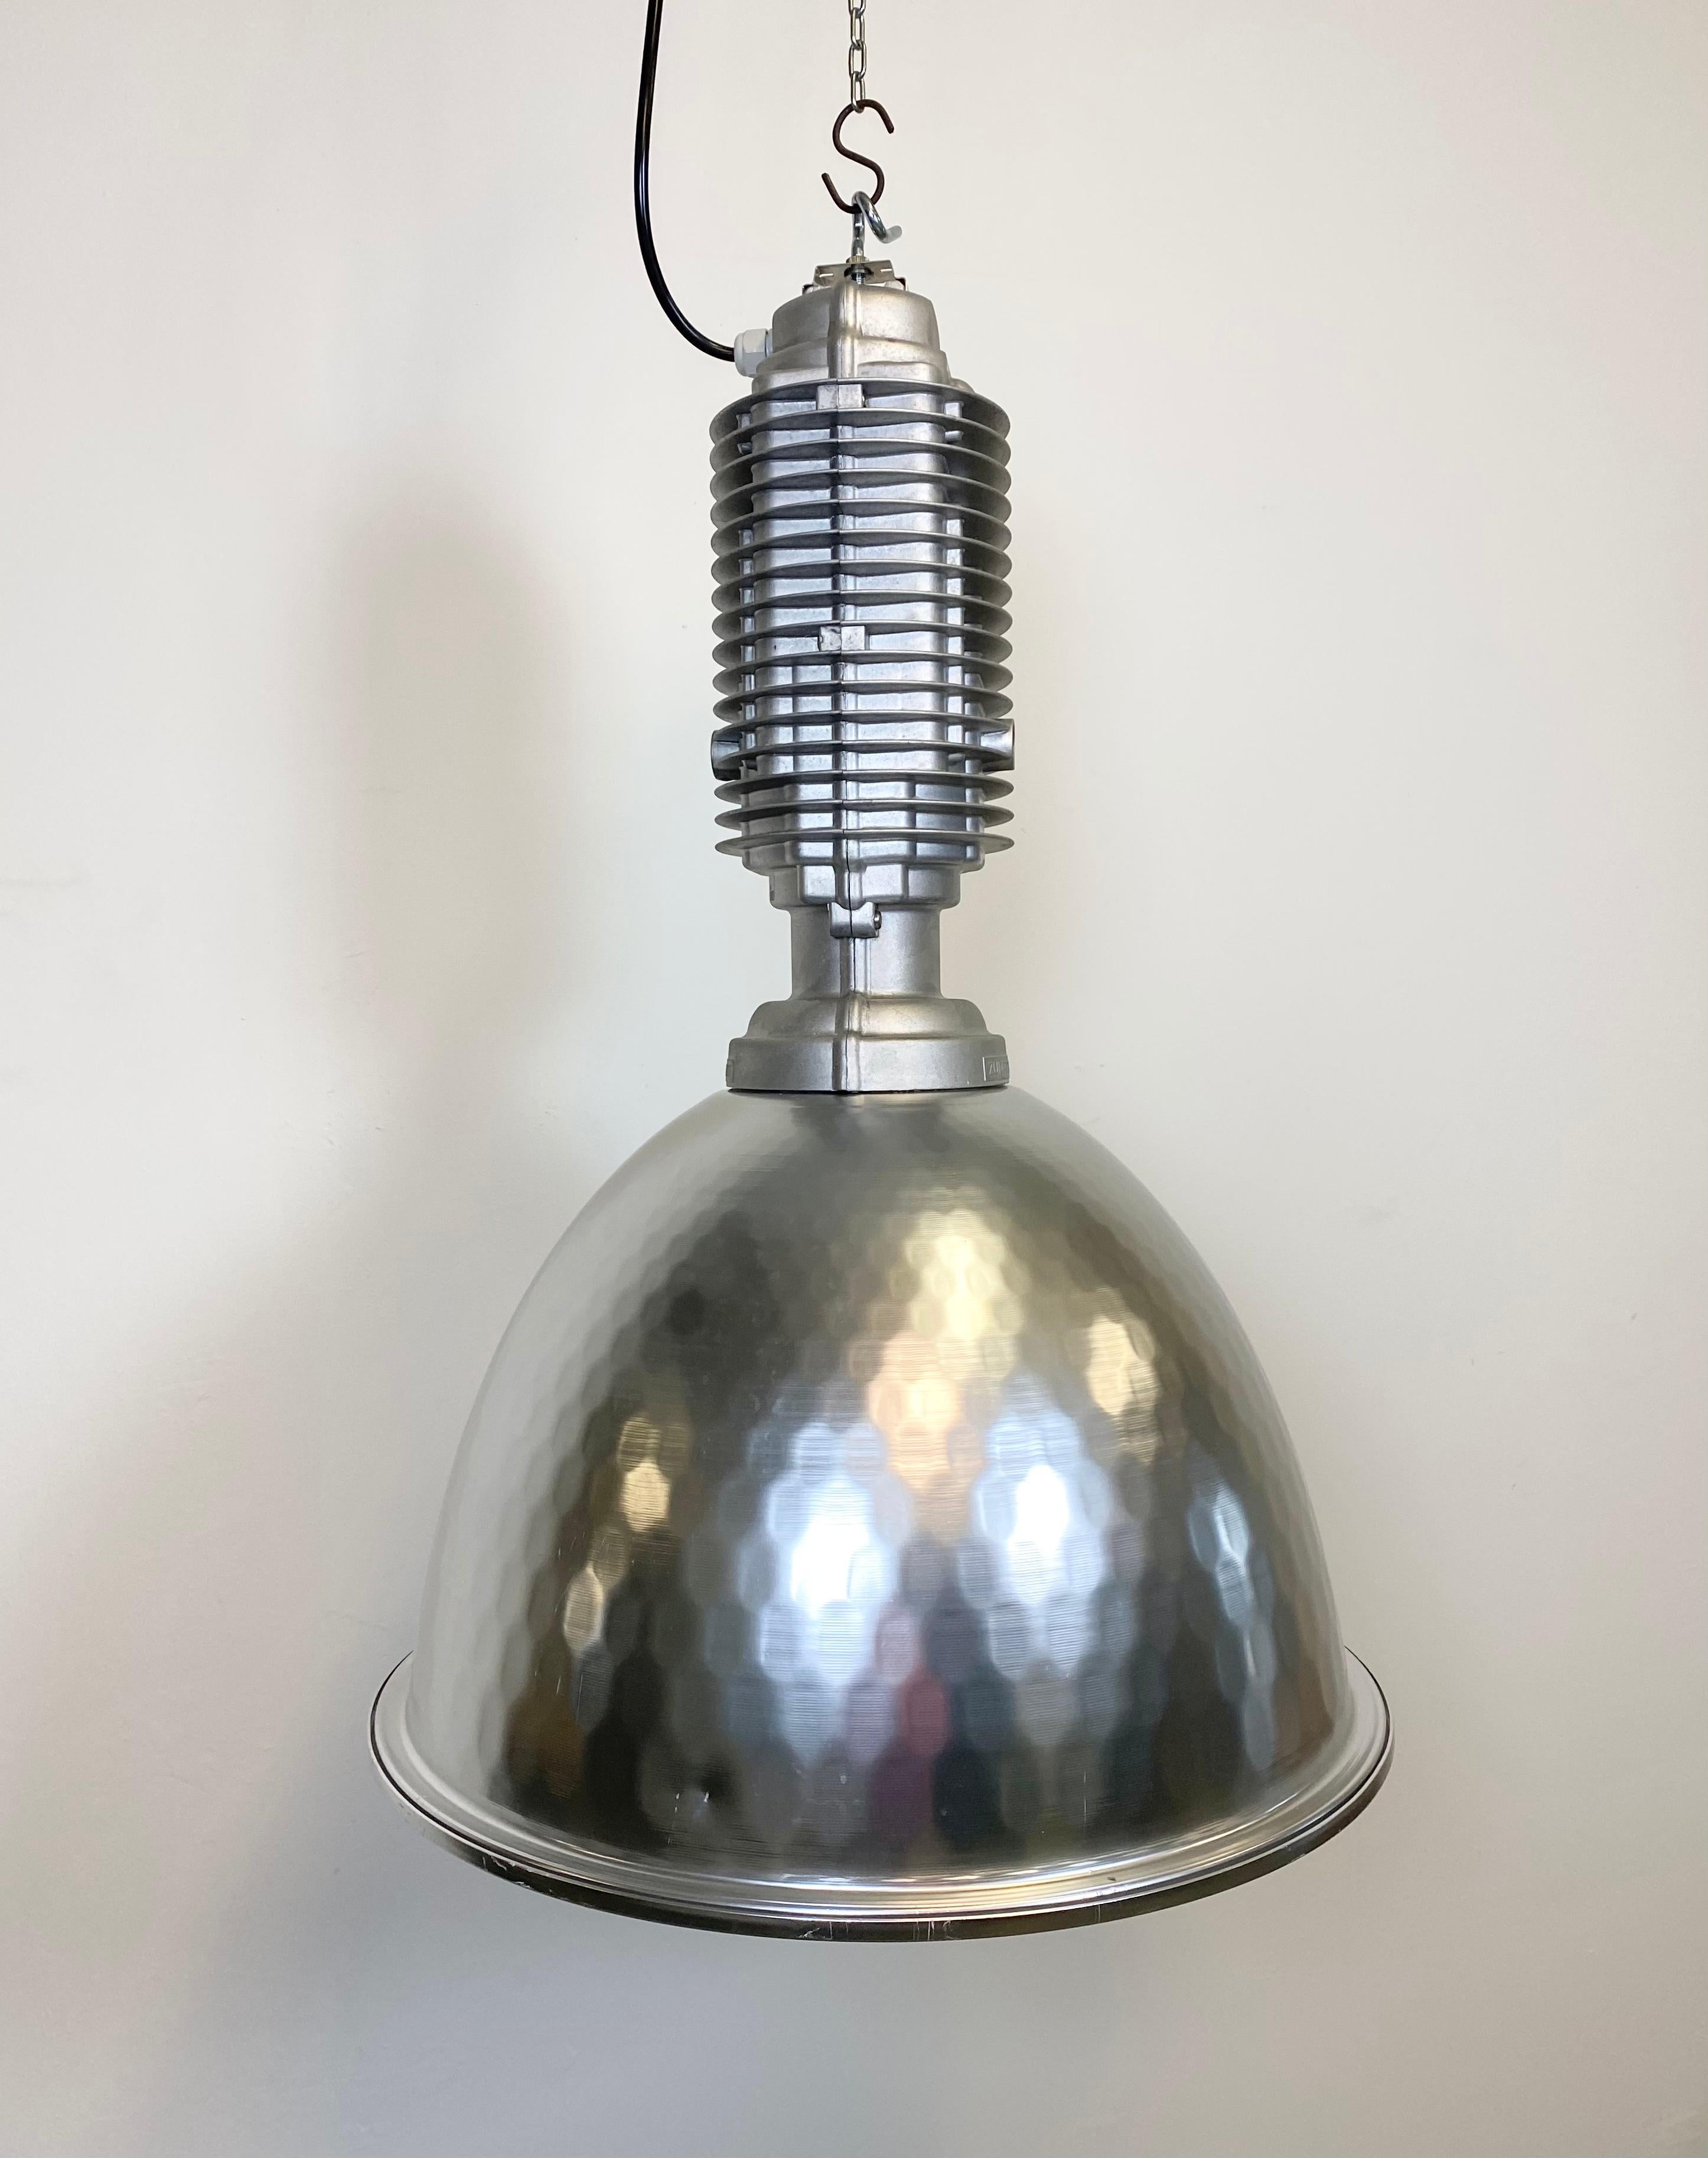 This industrial pendant light was designed by Charles Keller for Zumtobel Staff and was used in factories. It features cast aluminum top, aluminium shade, socket for E27 light bulbs and new wire. It weighs 5,5 kg. The diameter is 54 cm.